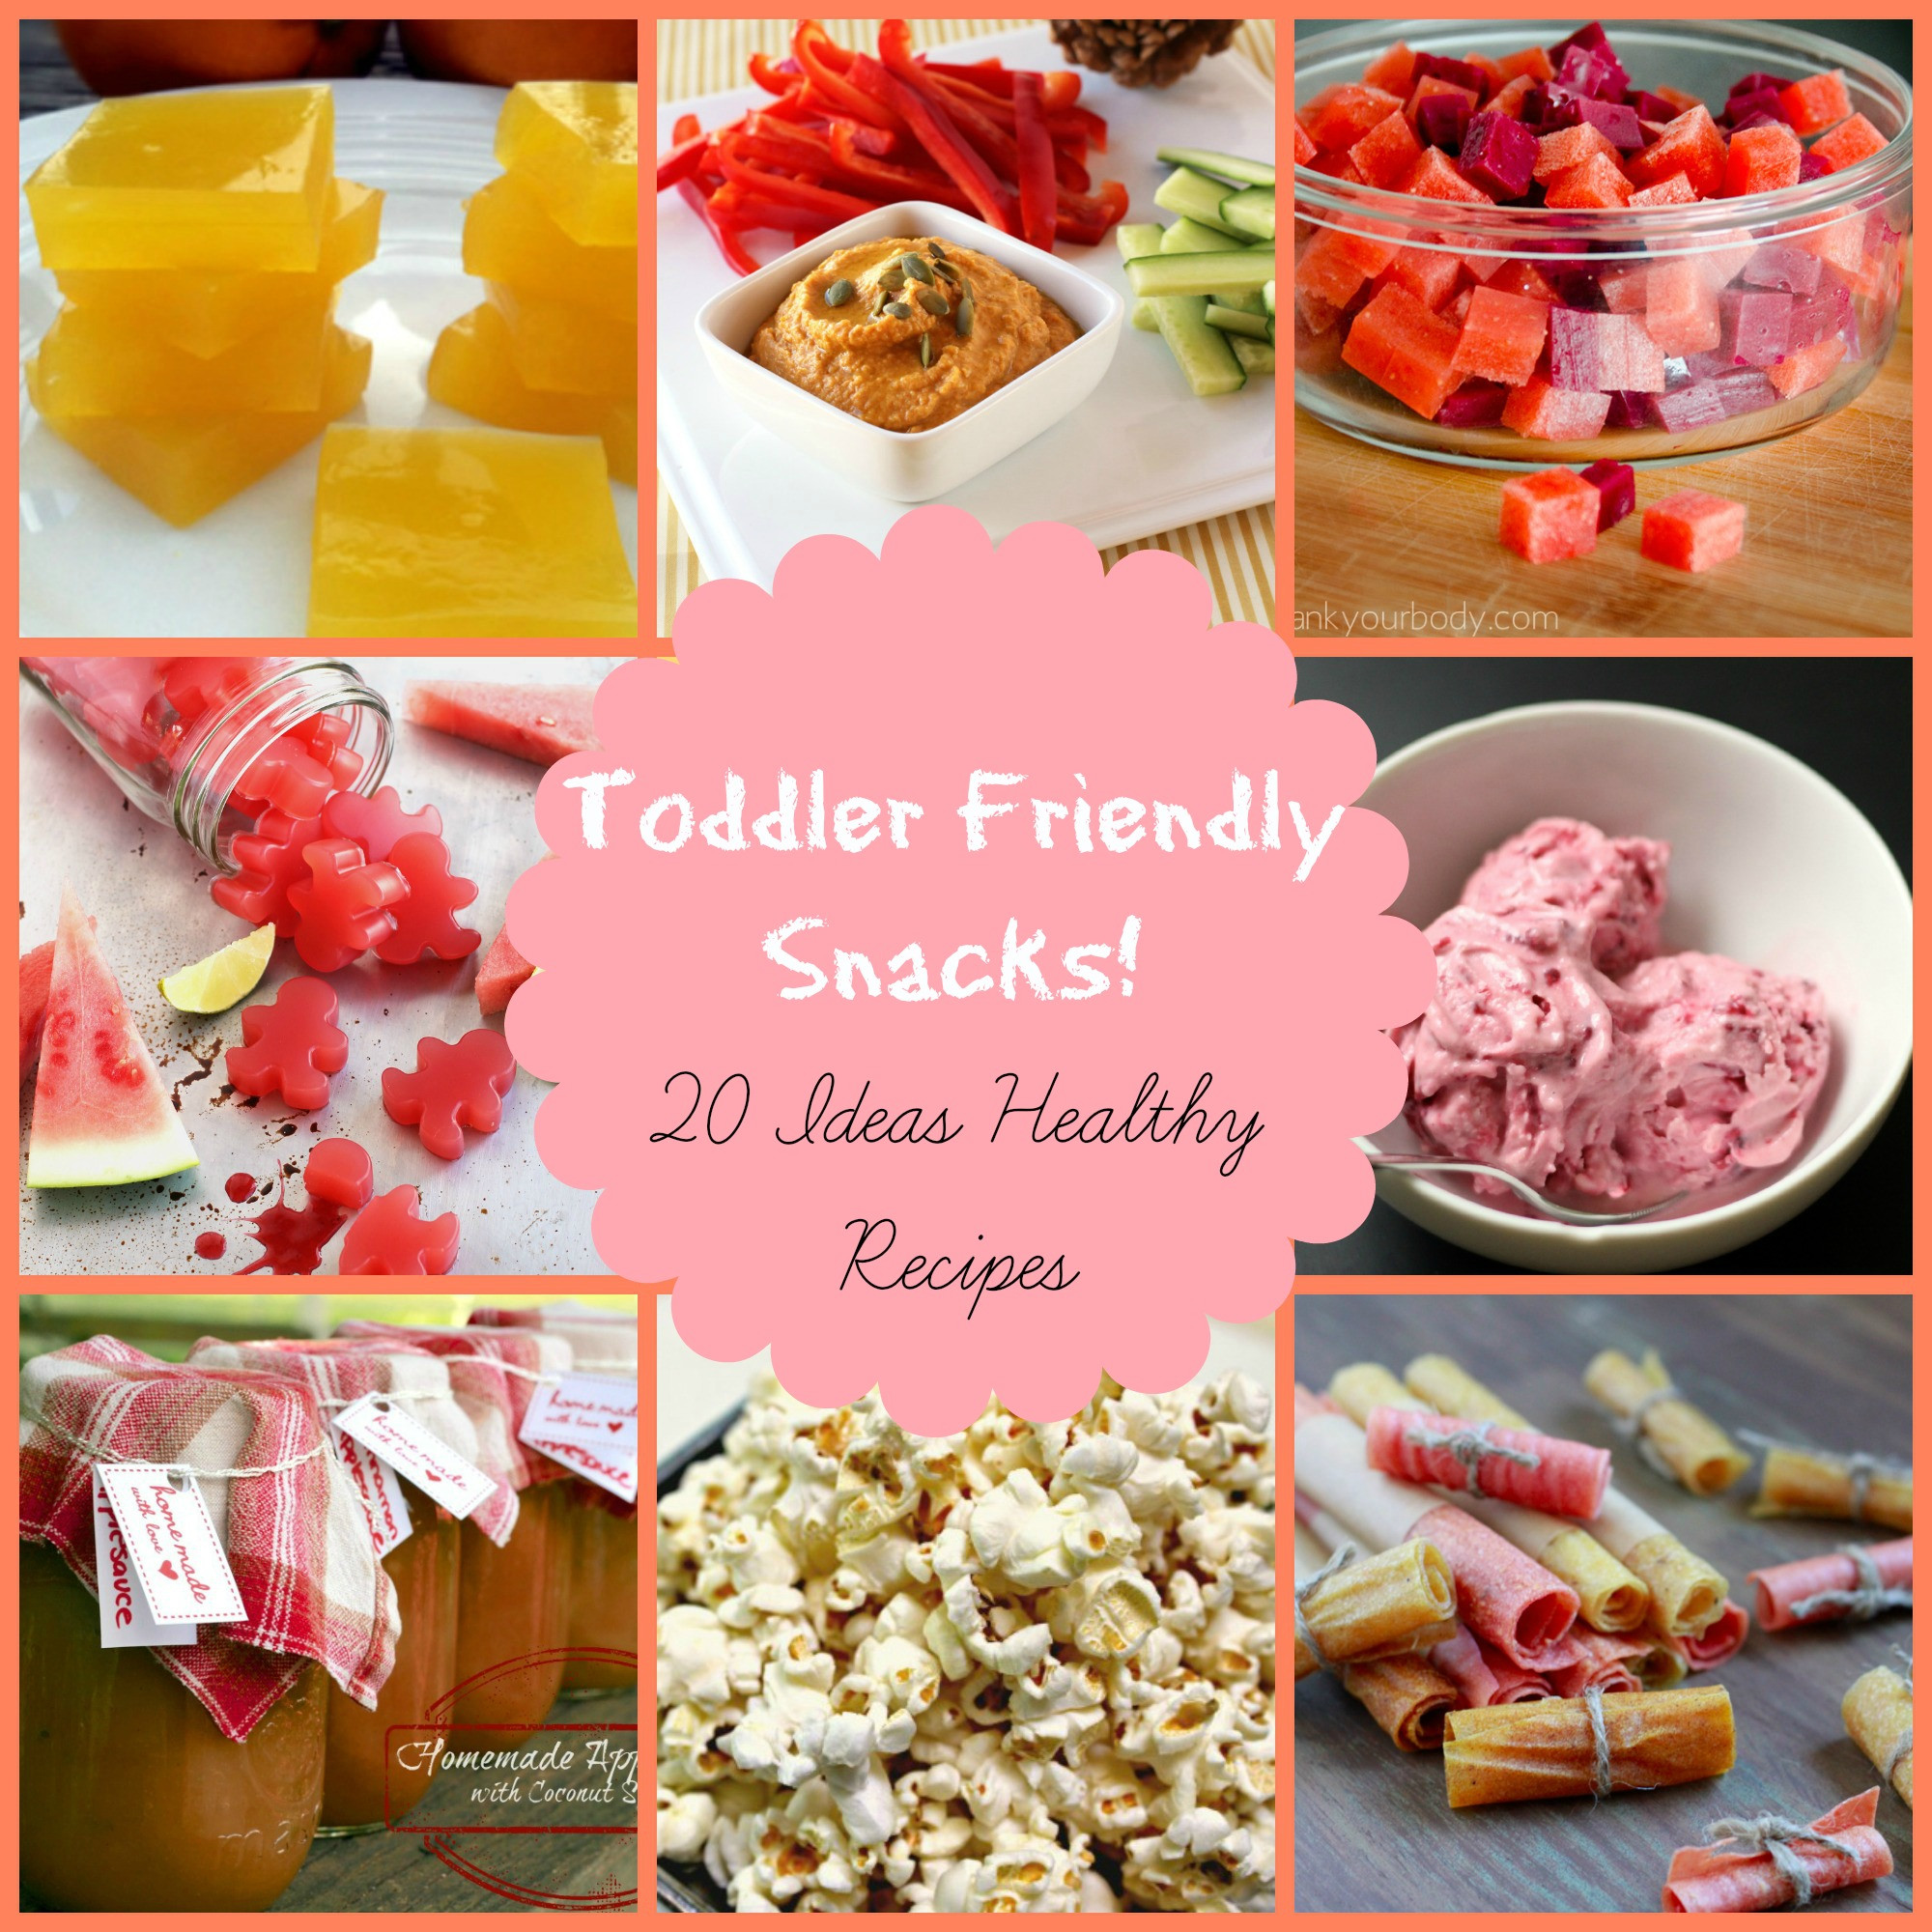 Best Healthy Snacks For Kids
 Healthy Snacks for Kids 20 toddler friendly ideas